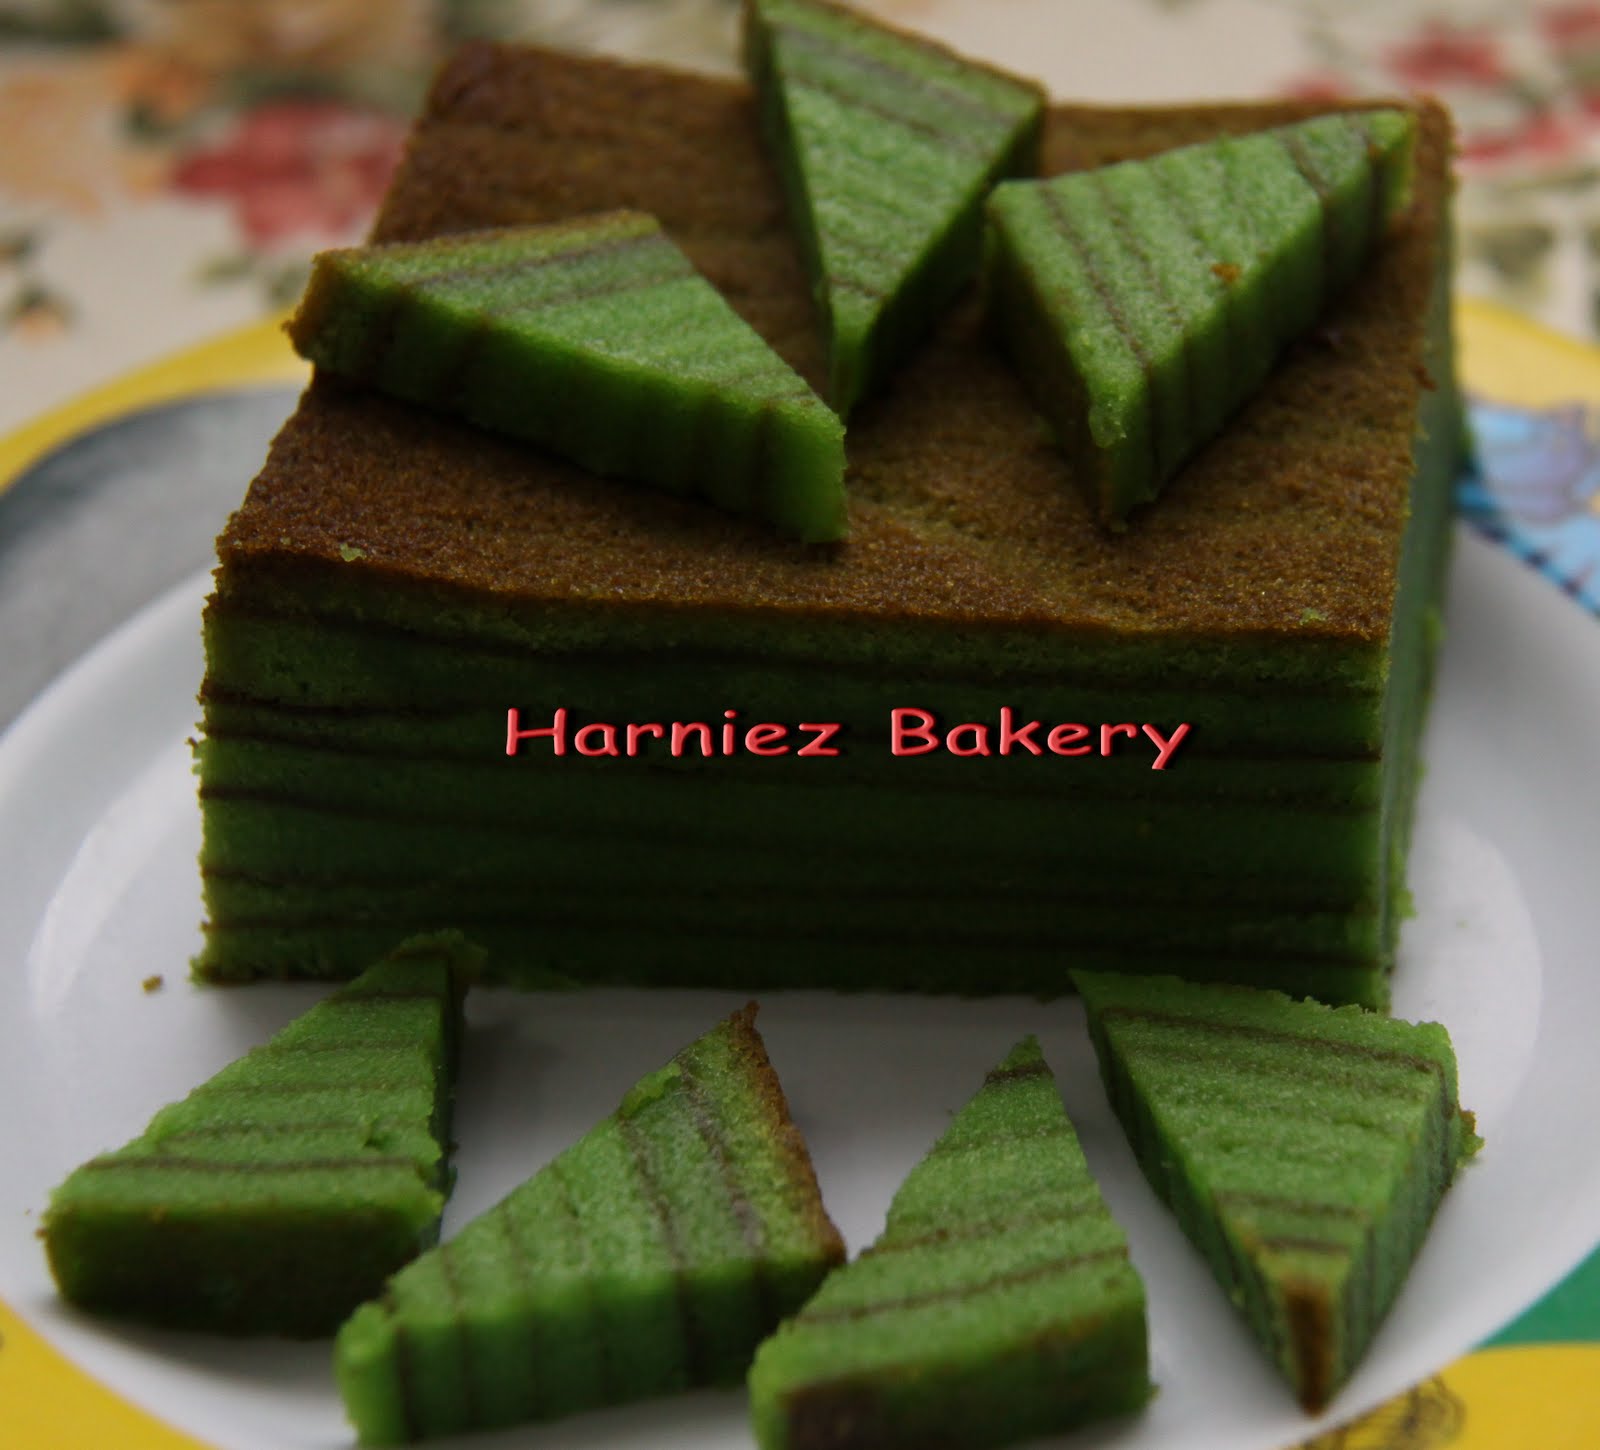 Harniezbakery - Specially for Cup Cakes, Deco Cakes 